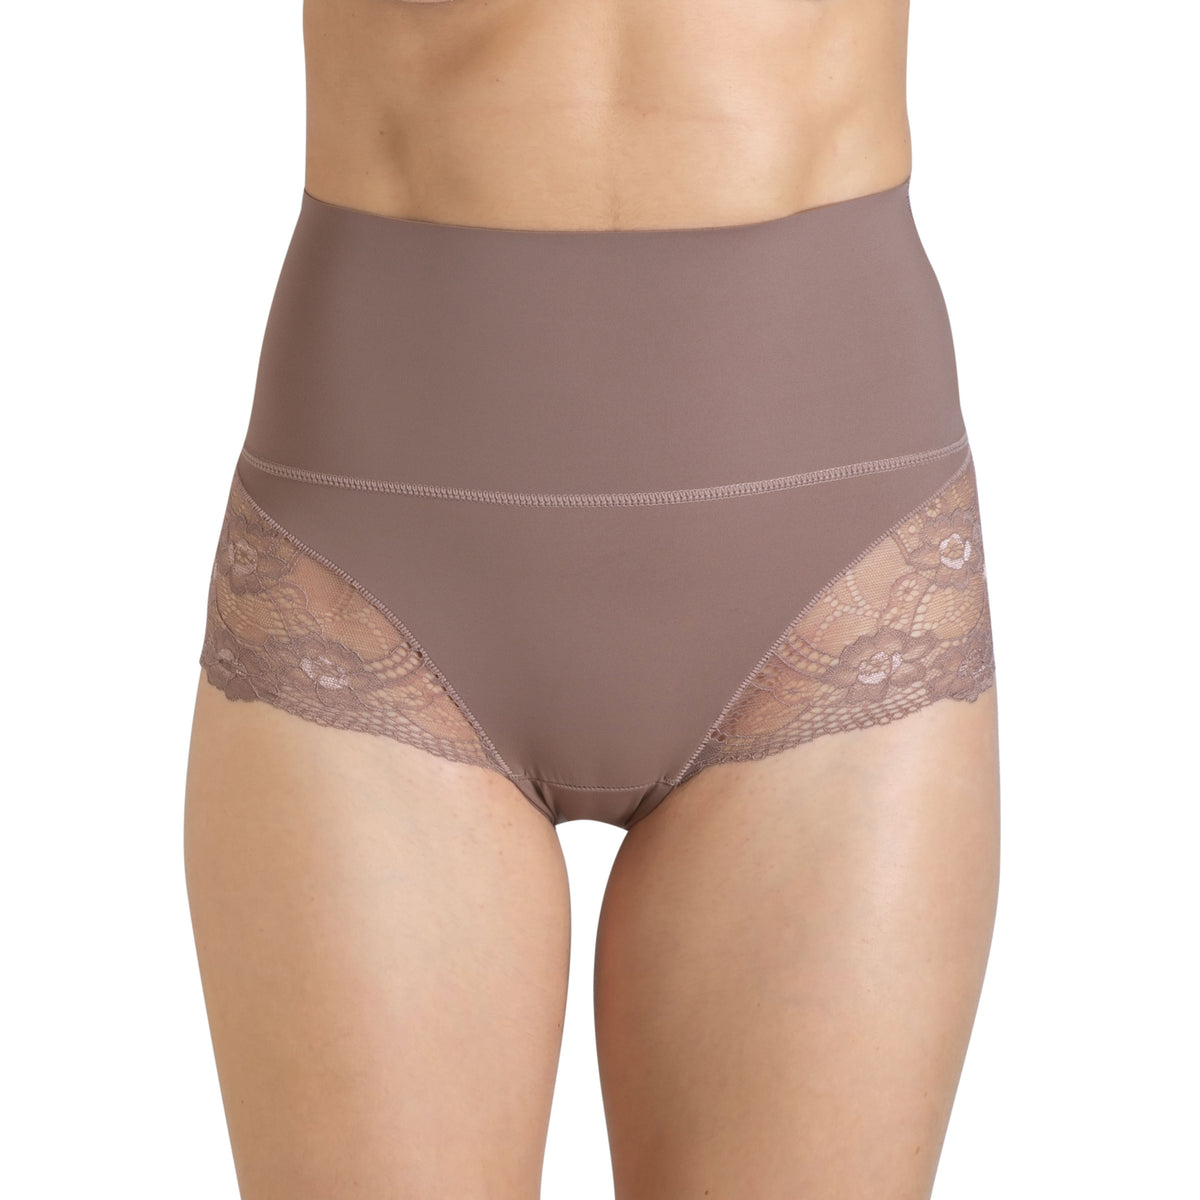 Control Band Brief with Lace Bottom - 2 Pack – NY Intimates